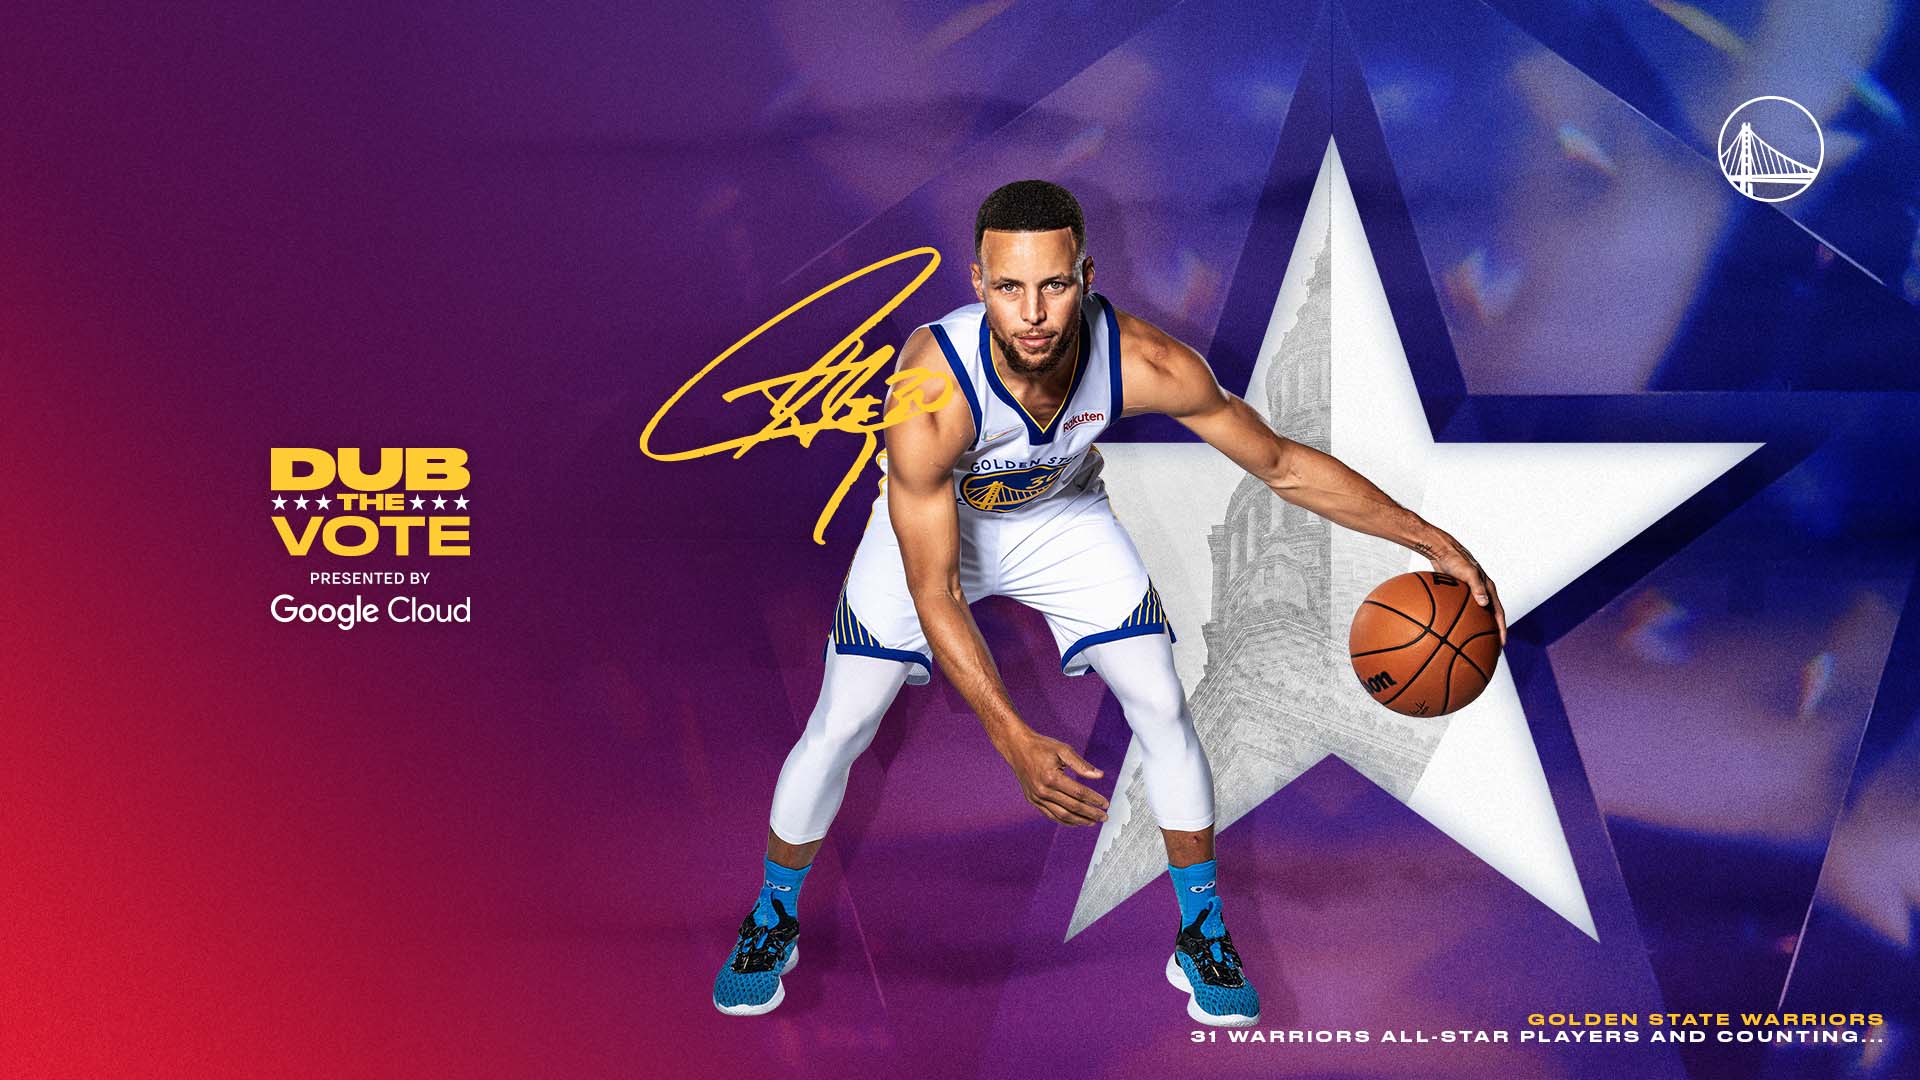 Stephen Curry 2022 All Star Vote Highlights. Golden State Warriors